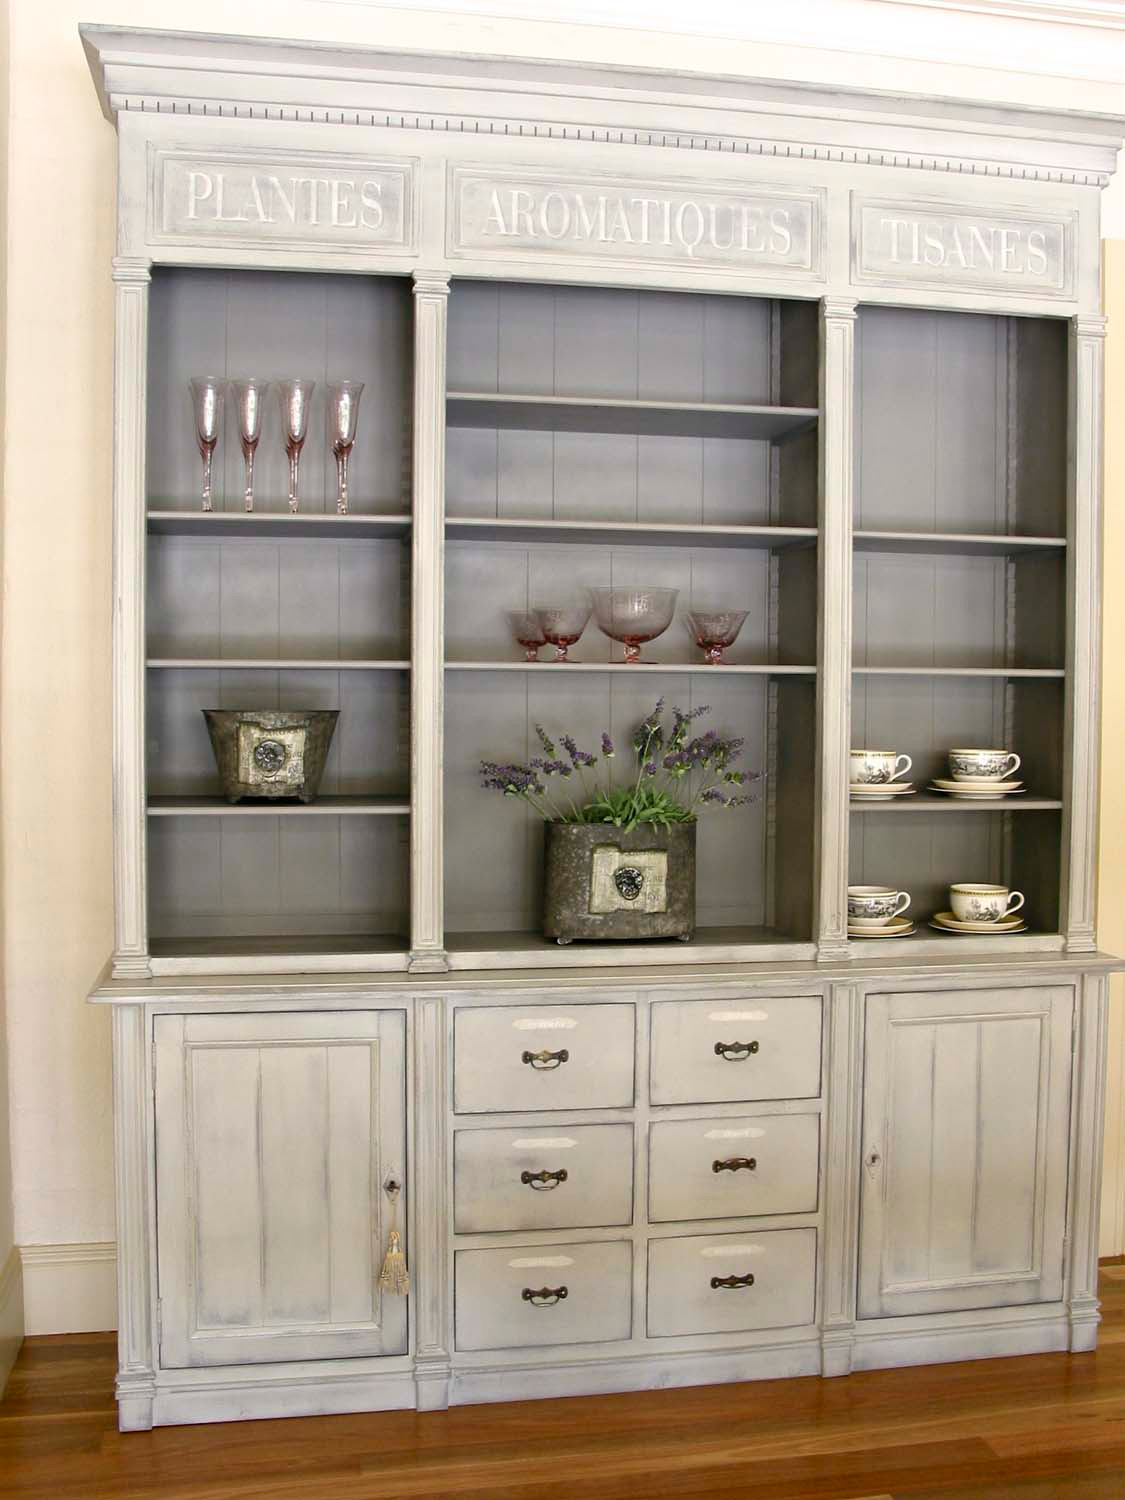 8 French buffet for dining room with décor and comes with matching table and chairs